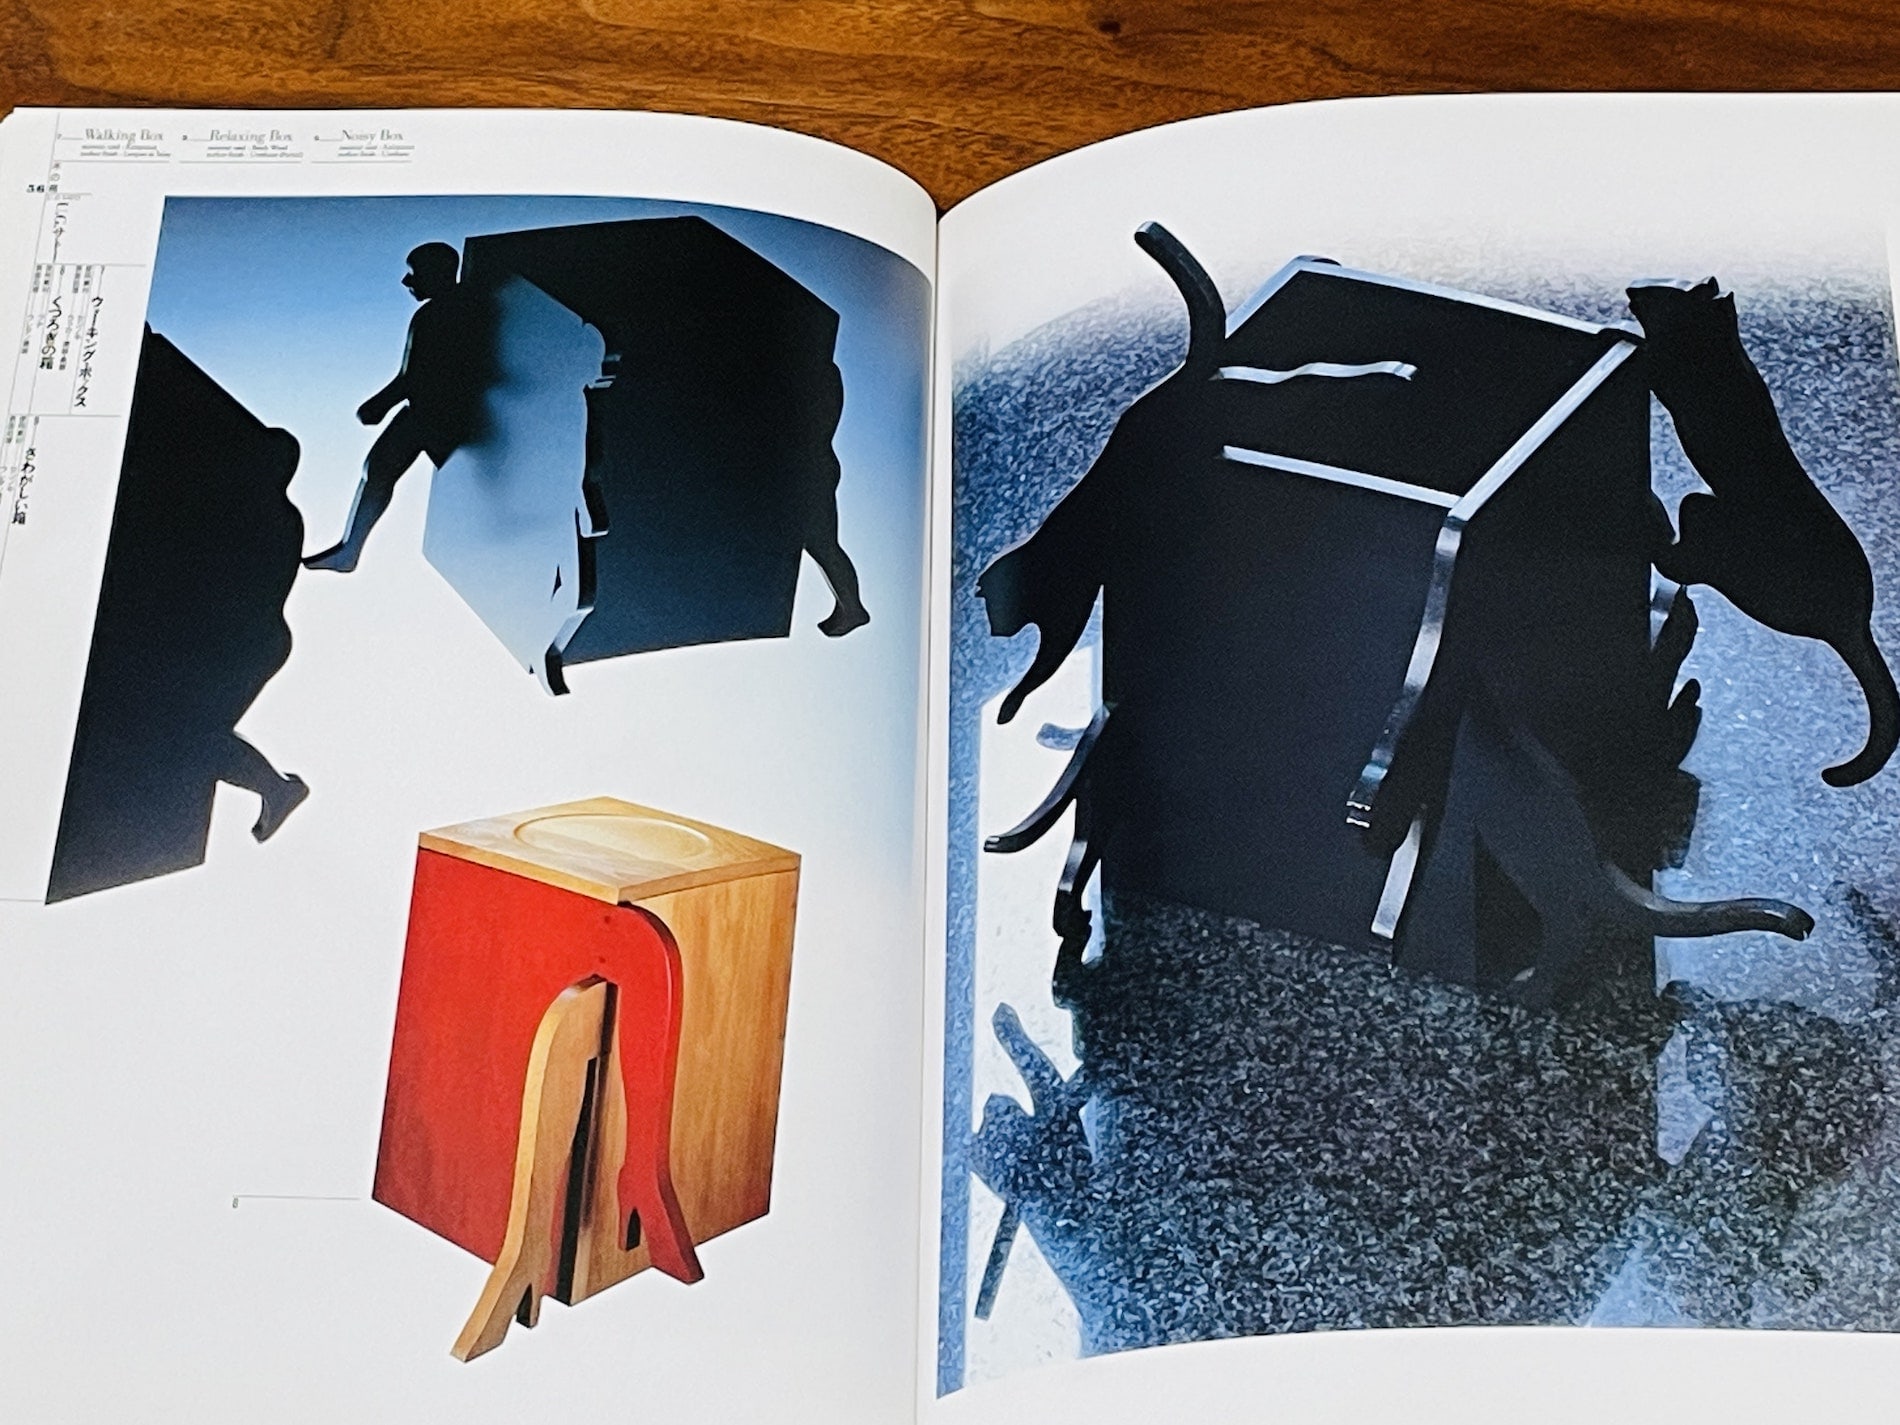 black and red/maple ornate figurine boxes in the shame of silhouettes, body parts, and jumping cats; from Wood Package book, by Keiko Hirohashi